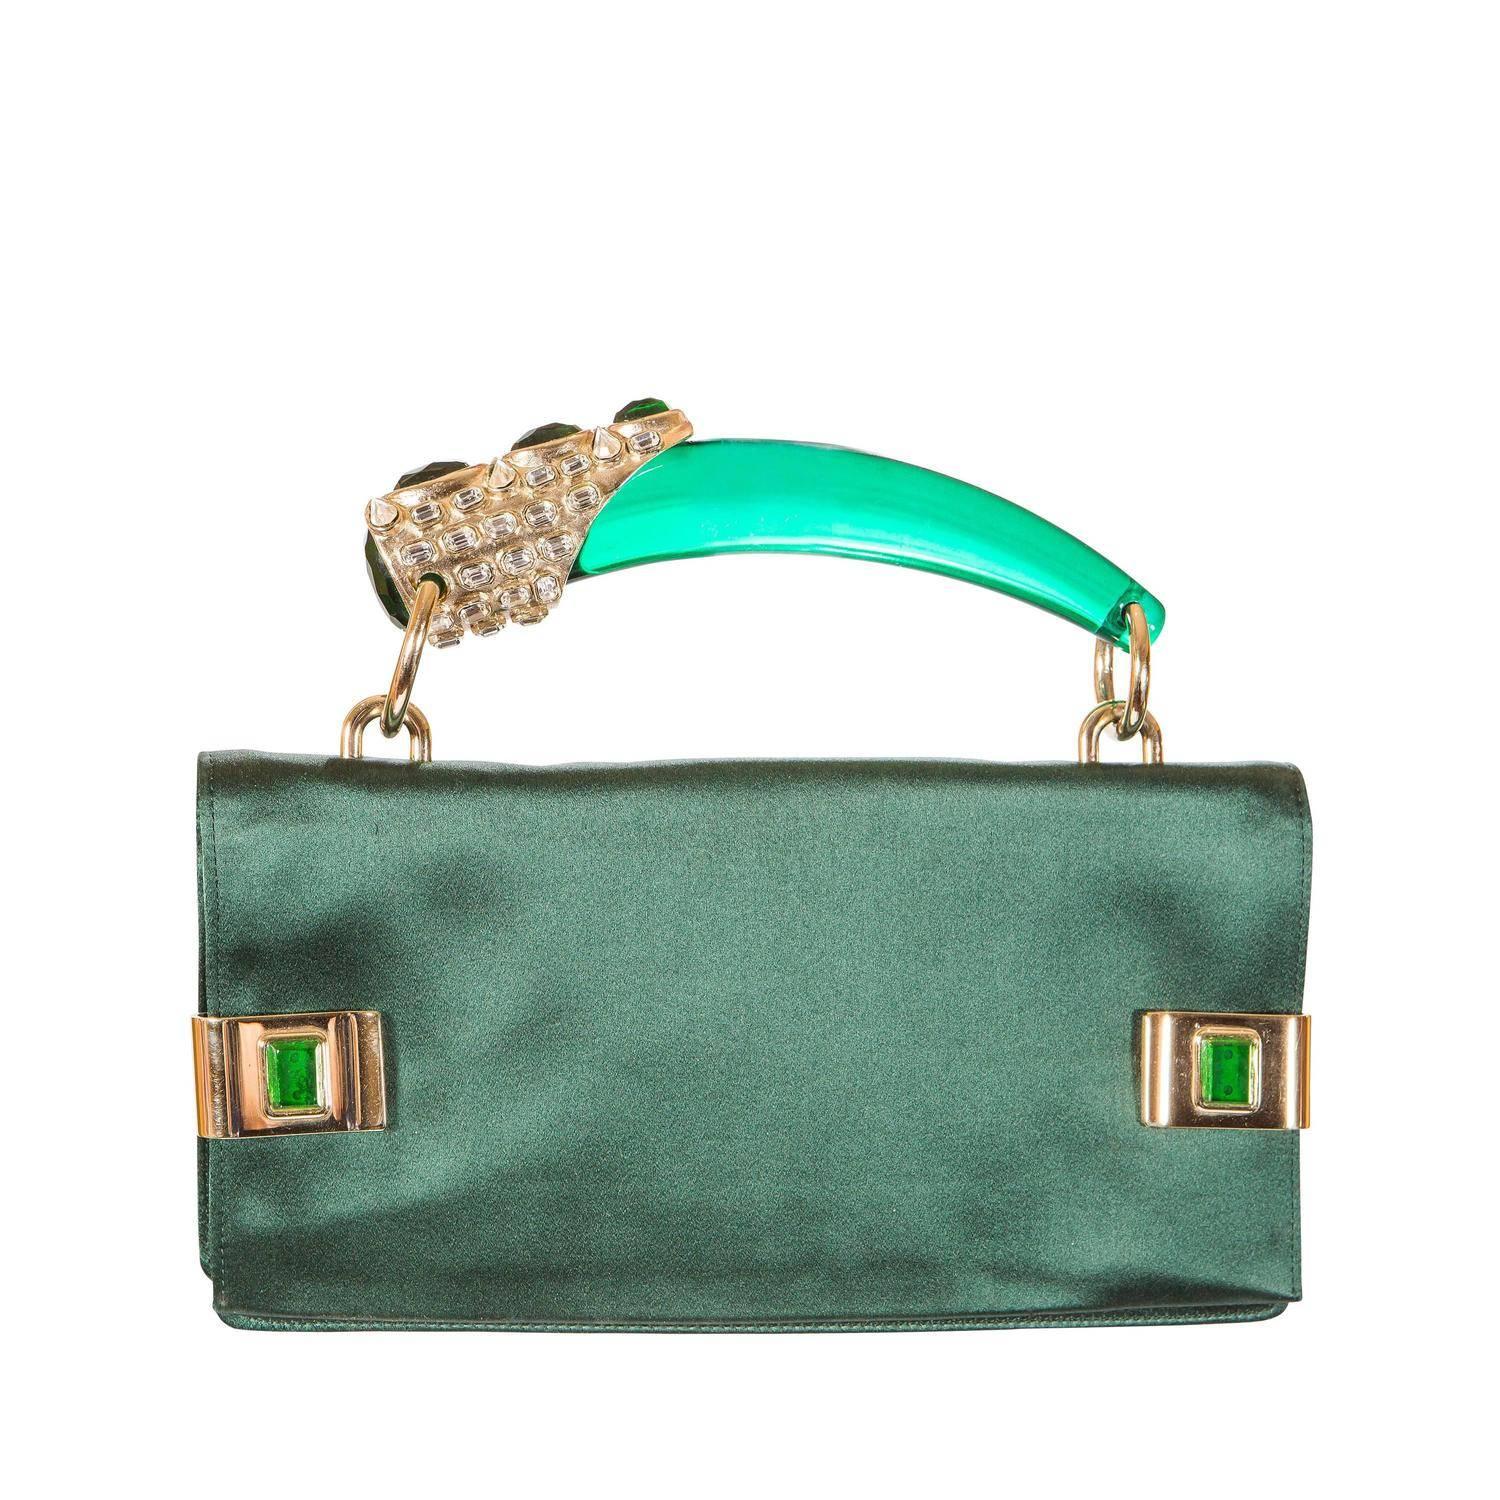 Sample - only one ever made
Tom Ford for Yves Saint Laurent Spring 2004 
Emerald Jeweled Bag with lucite horn handle
Emerald Silk with gold hardware and green and white jewels
Gold jeweled clips open at side.